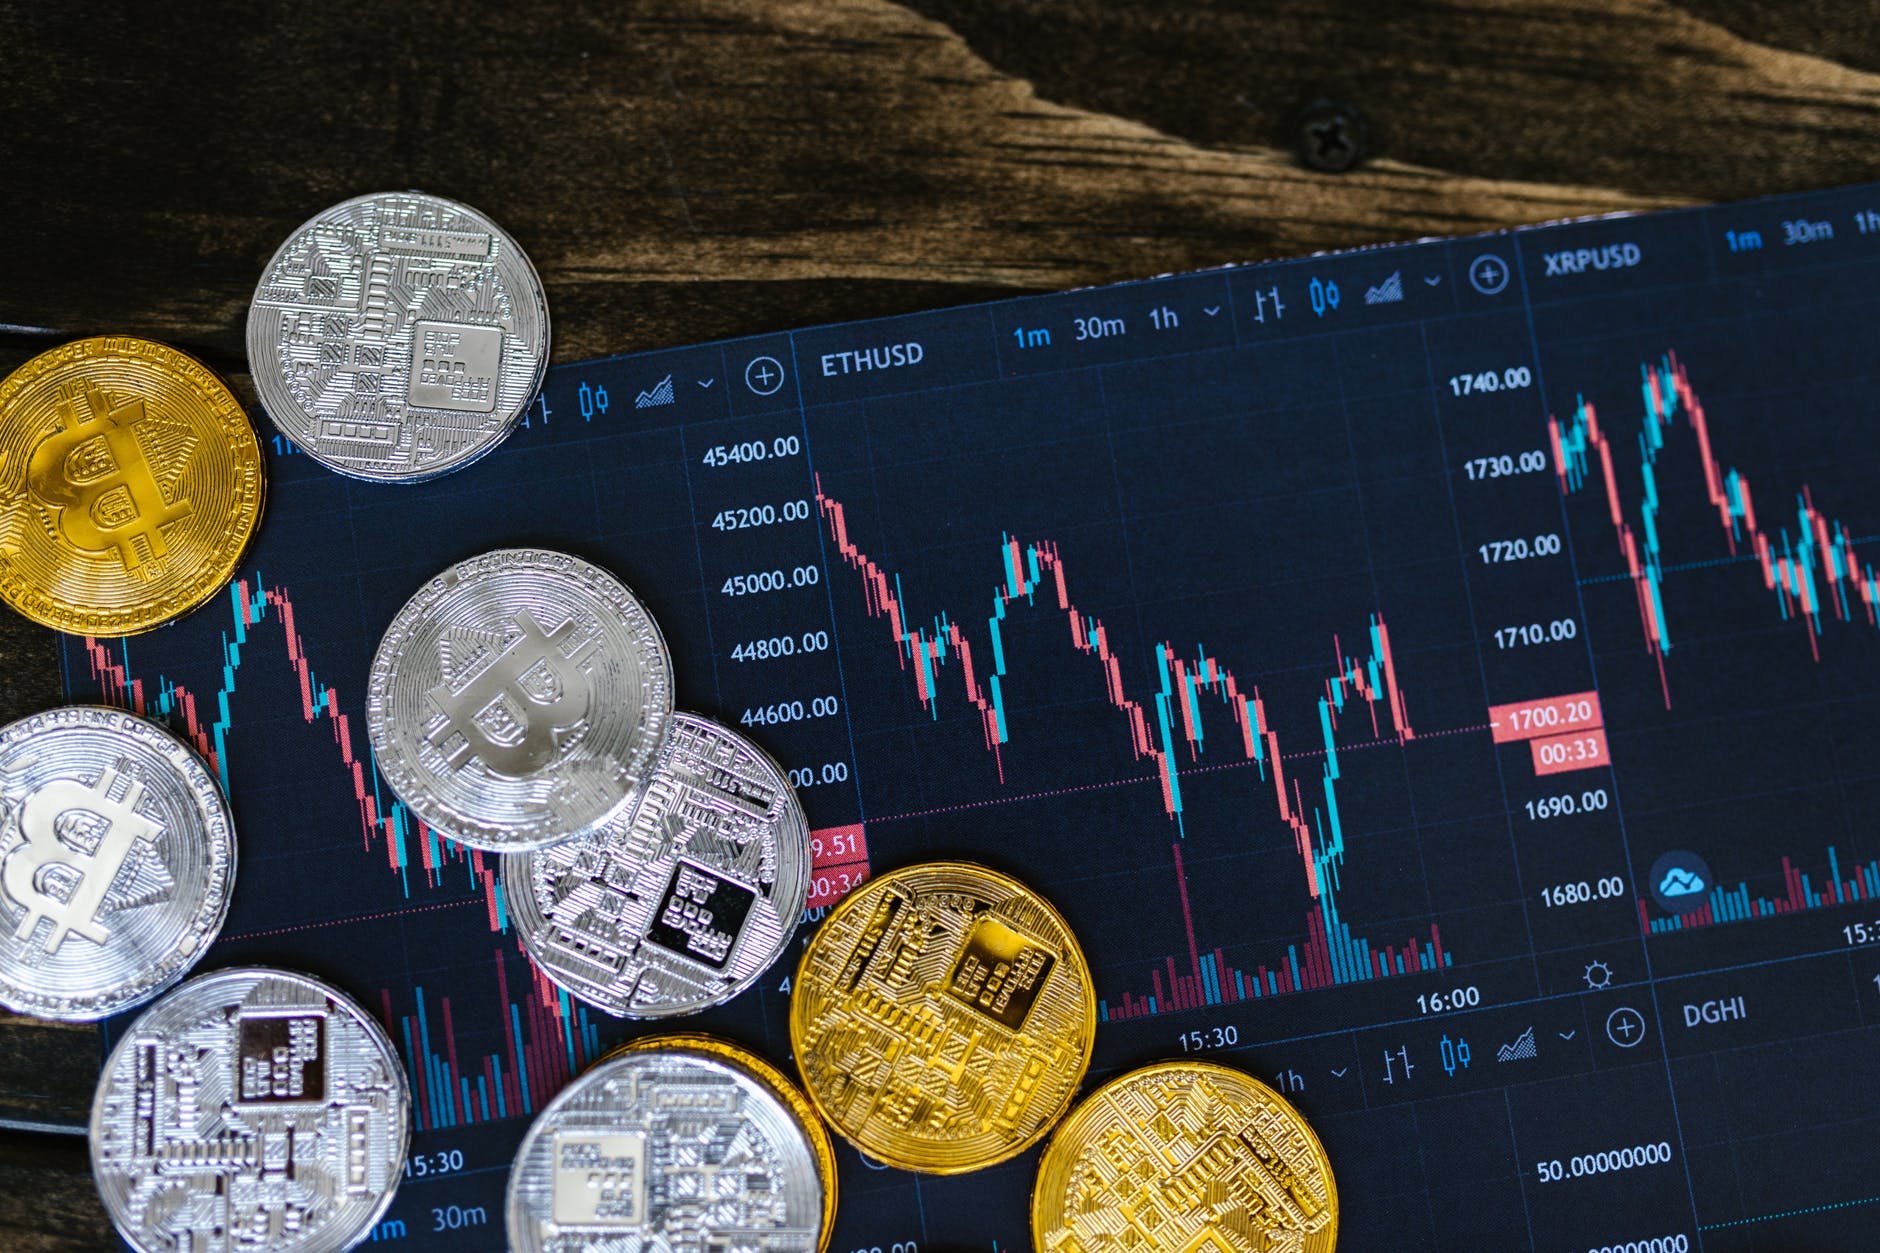 Steps to trade cryptocurrency effectively